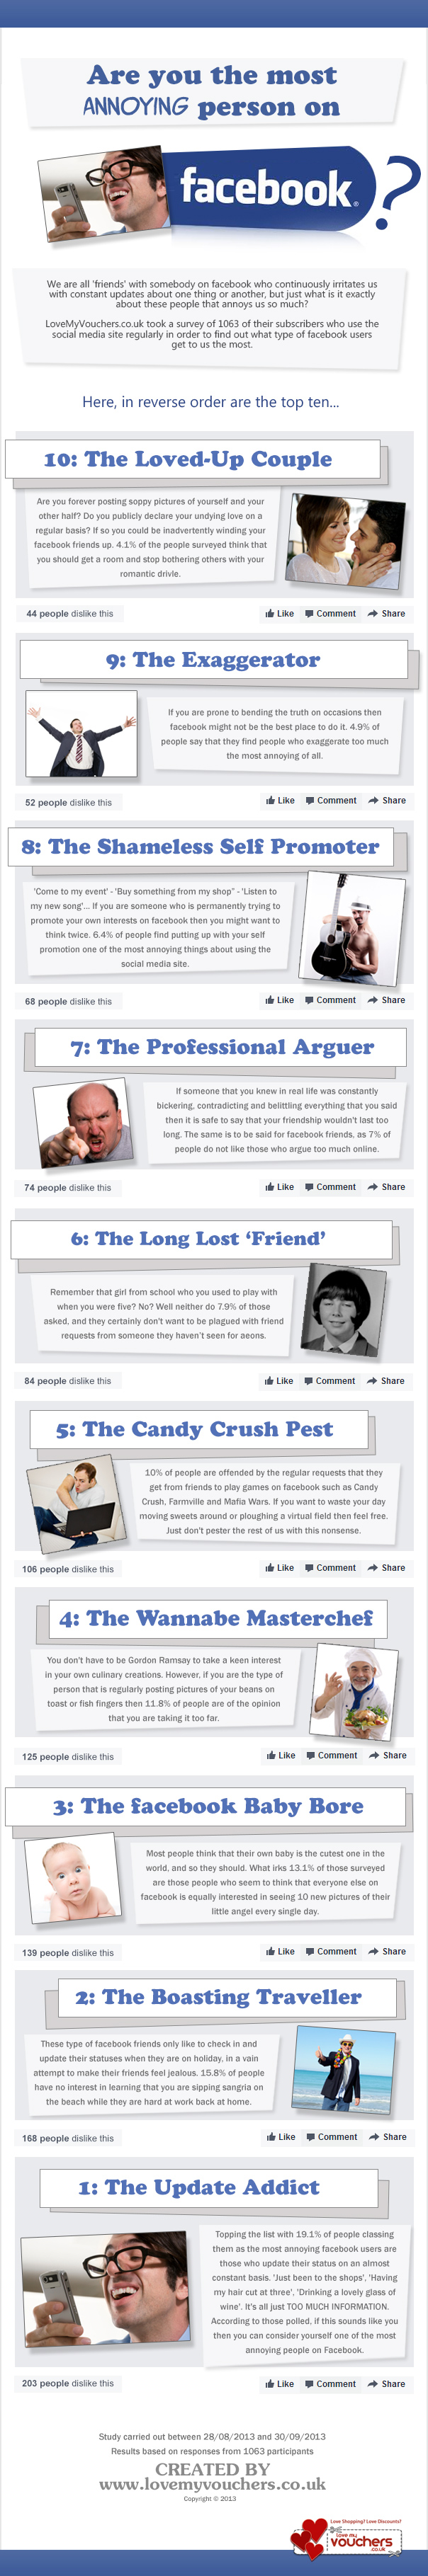 Are You the Most Annoying Person on Facebook? Image: Linda/lovemyvouchers.co.uk